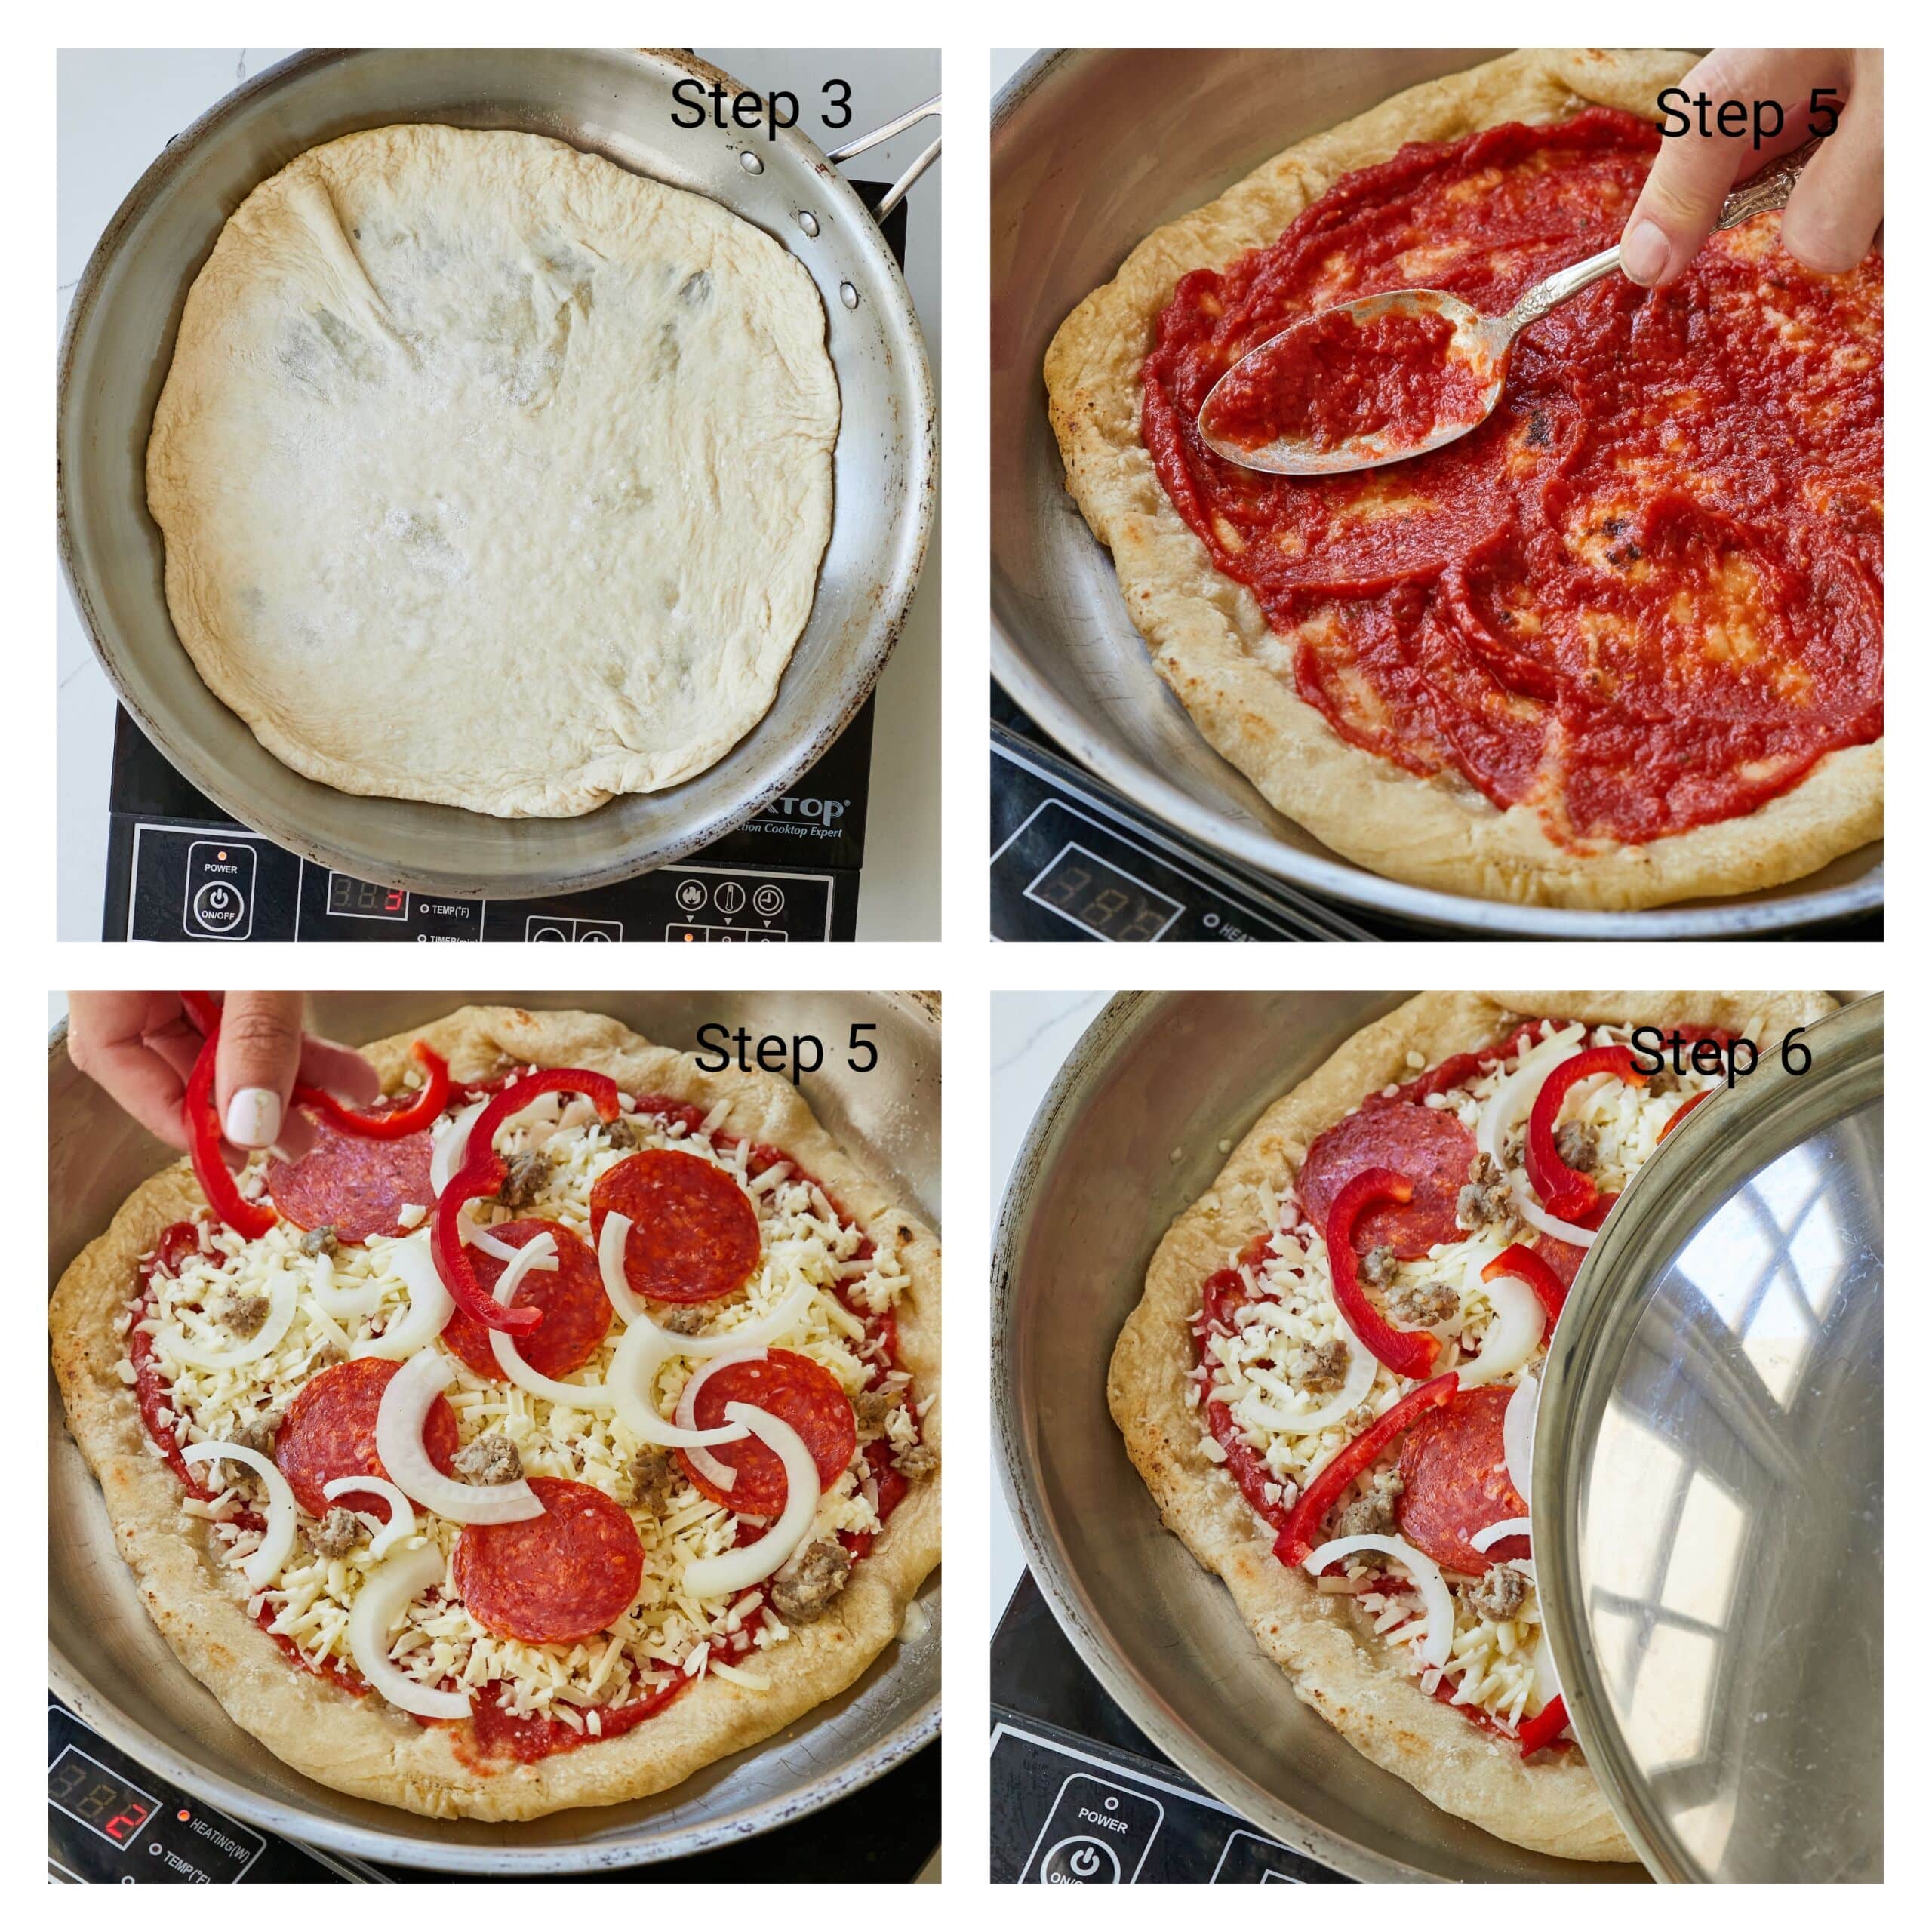 Step-by-step instructions on how to pan fry the pizza: lay the pizza dough in the pan and cook until the crust bubbles and rises up but is only very slightly browned. Flip back over and spread the browned side with a thin layer of pizza sauce; add cheese and any of your desired toppings; Turn off the heat and place the lid back on for about 5 minutes to allow the toppings to heat up, the cheese to melt and the crust to crisp in the residual heat.